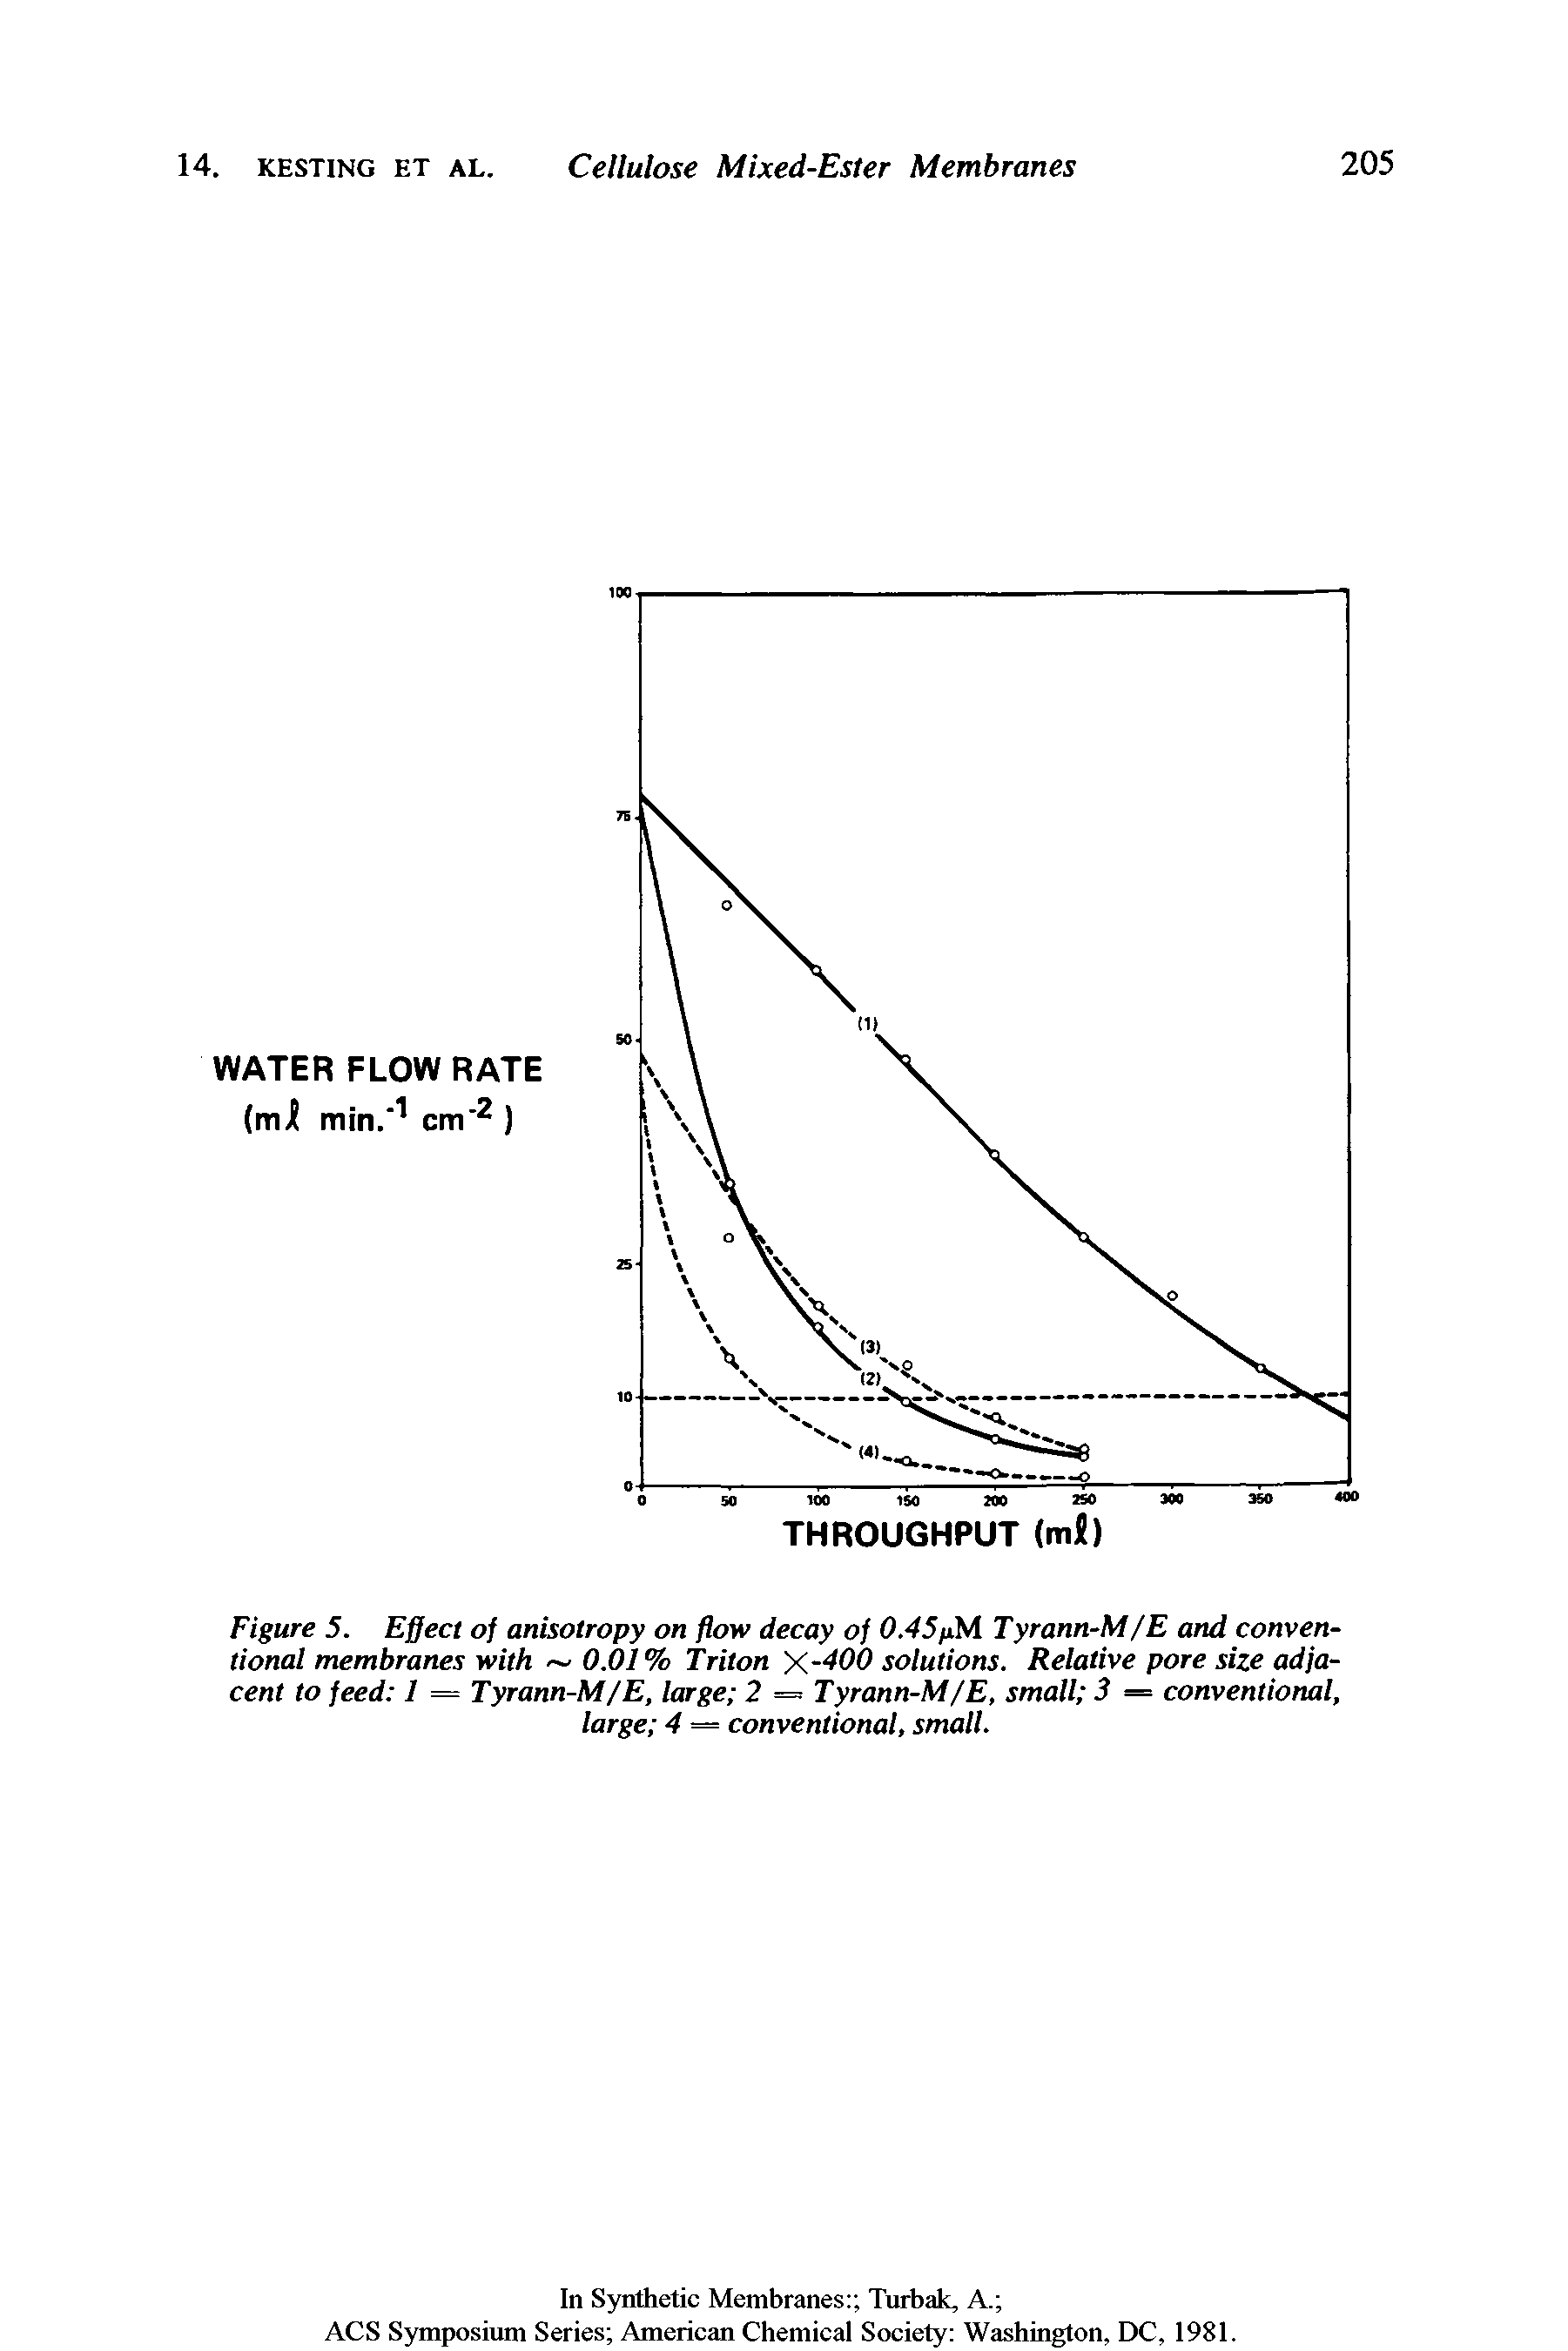 Figure 5. Effect of anisotropy on flow decay of 0.45pM Tyrann-M/E and conventional membranes with 0.01% Triton X-400 solutions. Relative pore size adjacent to feed 1 = Tyrann-M/E, large 2 — Tyrann-M/E, small 3 = conventional, large 4 = conventional, small.